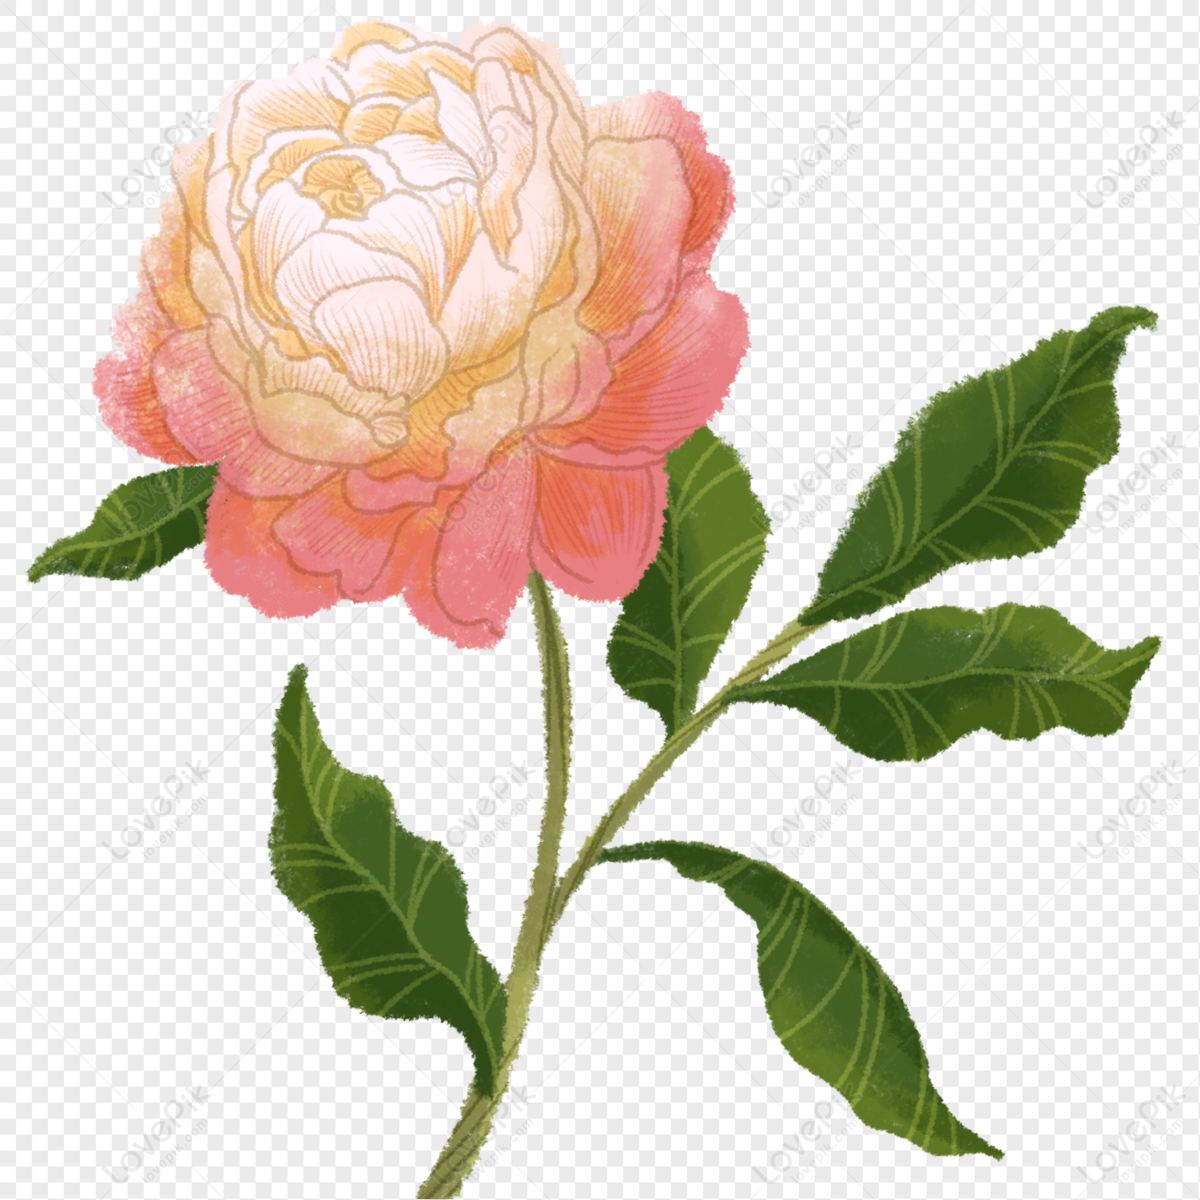 Hand Drawn Peony PNG Picture And Clipart Image For Free Download ...